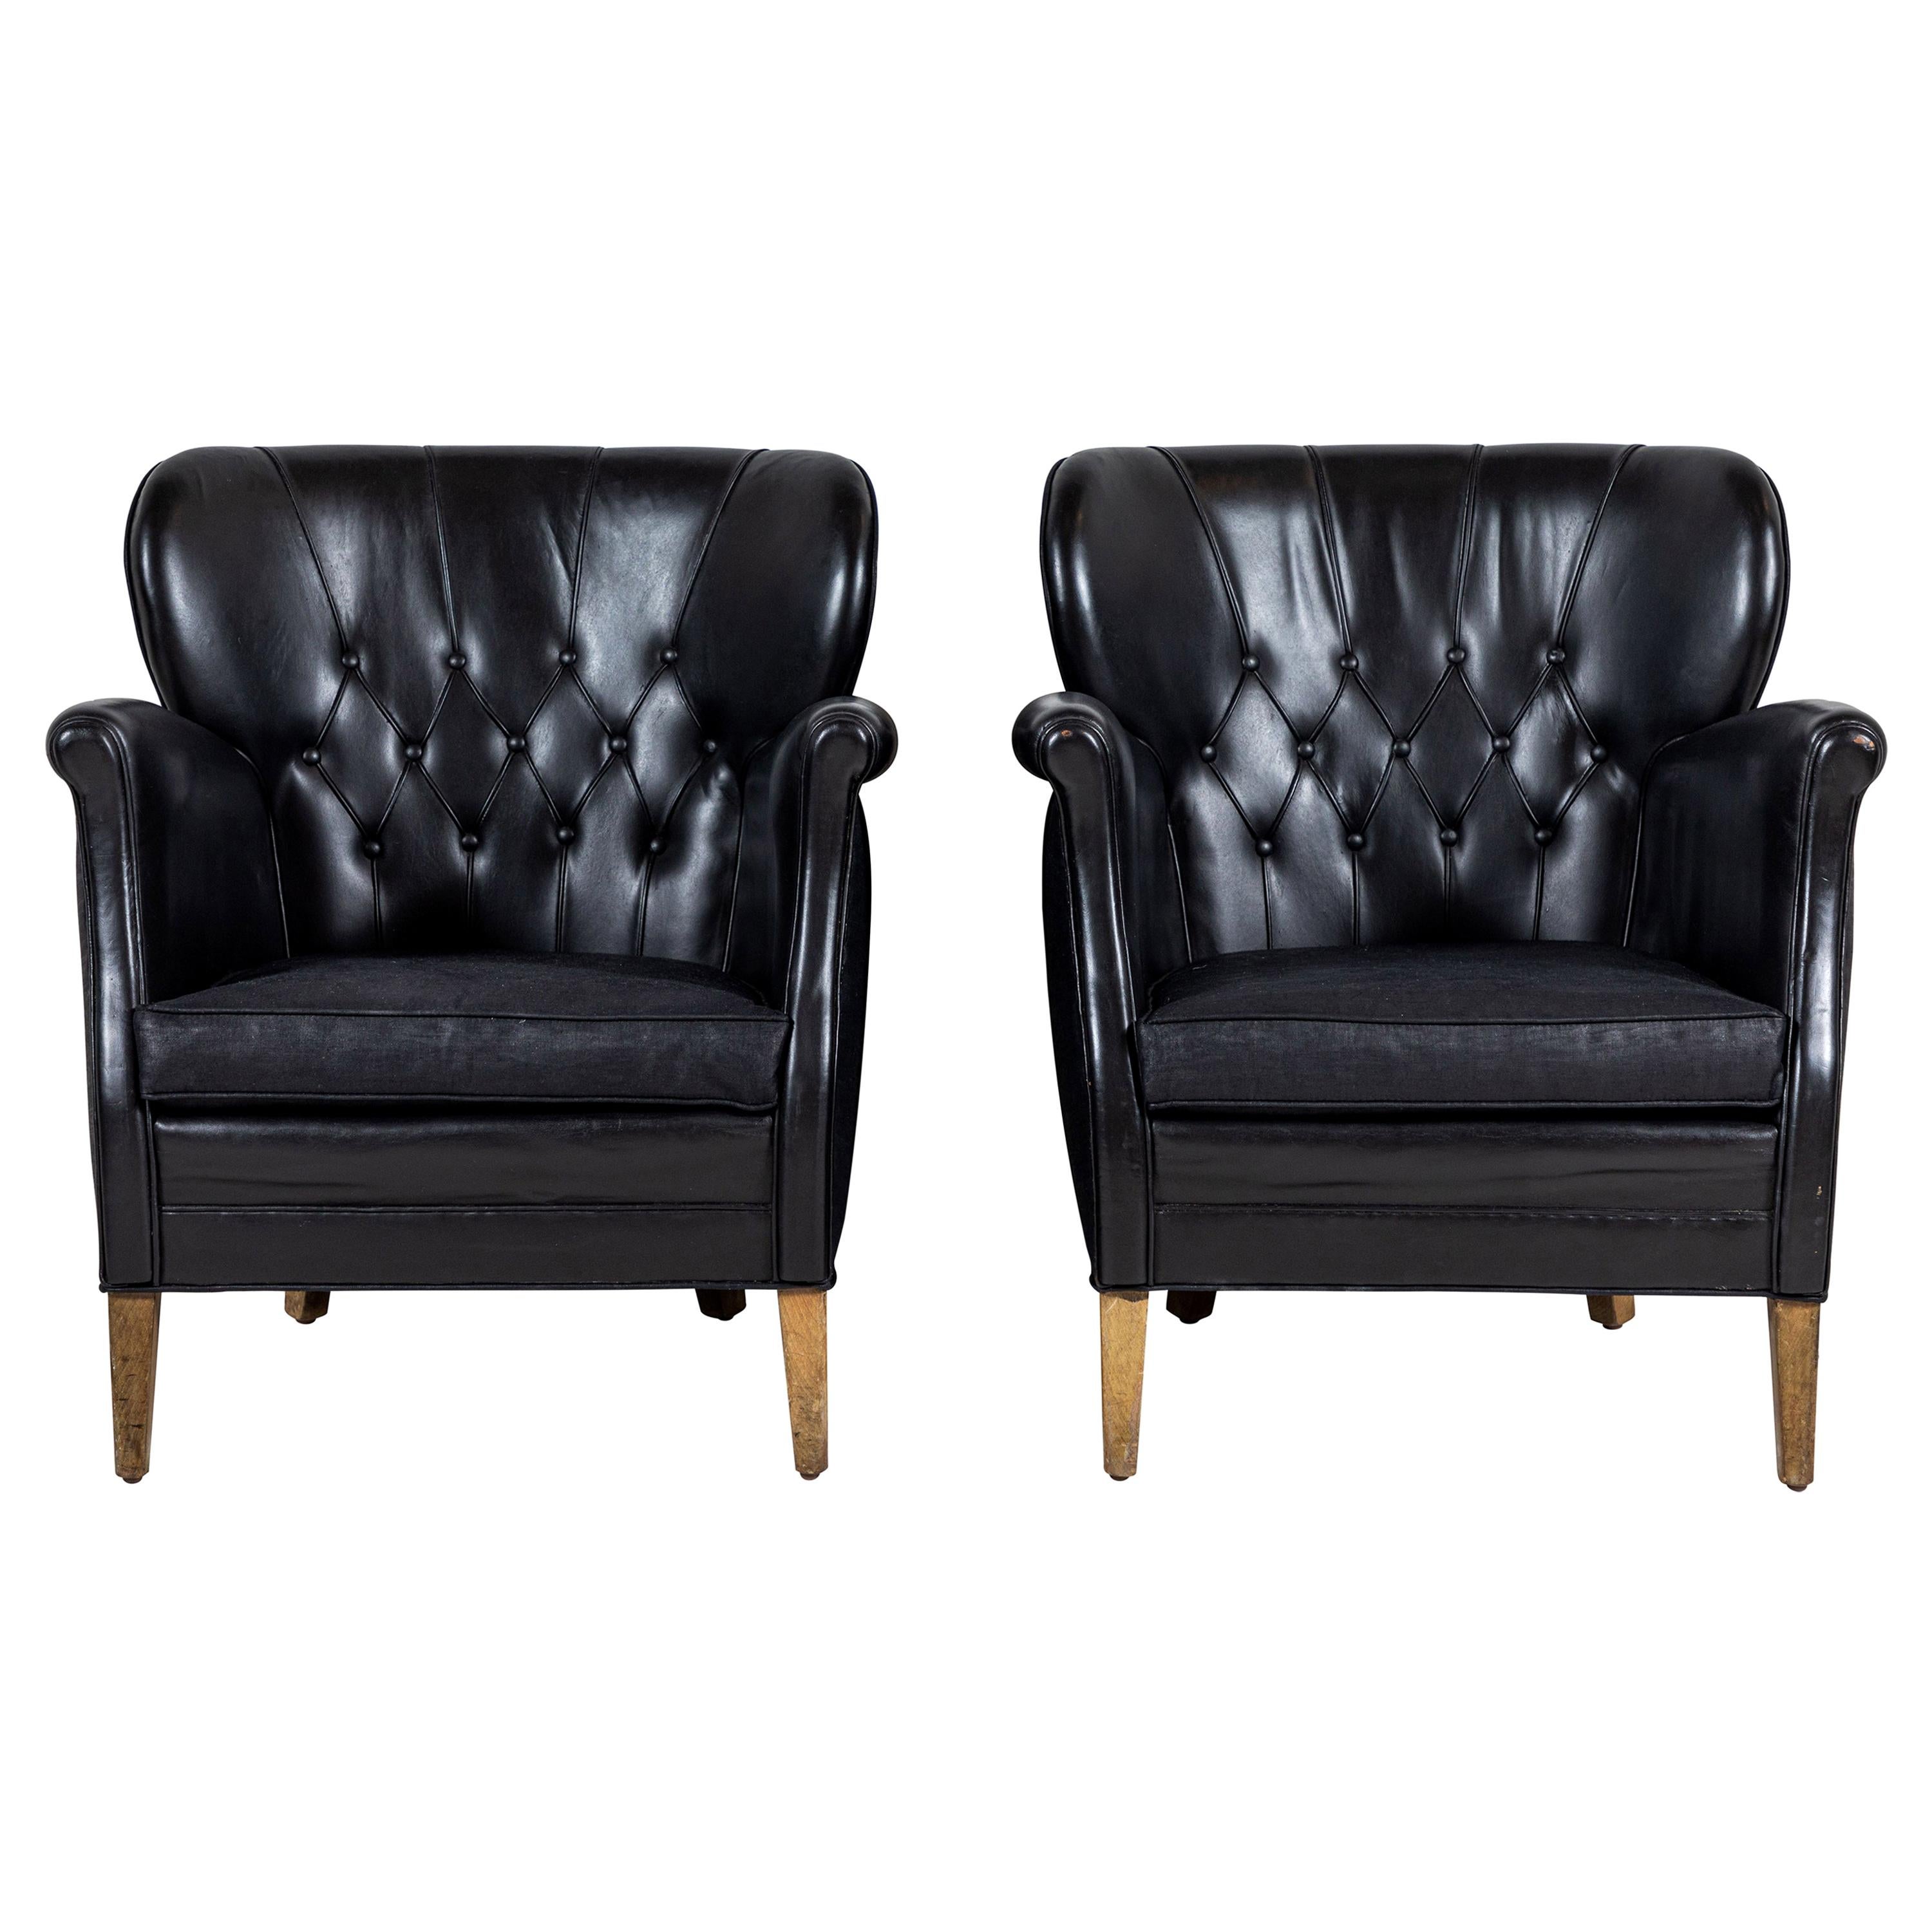 Danish Style Black Leather Tufted Pair of Chairs